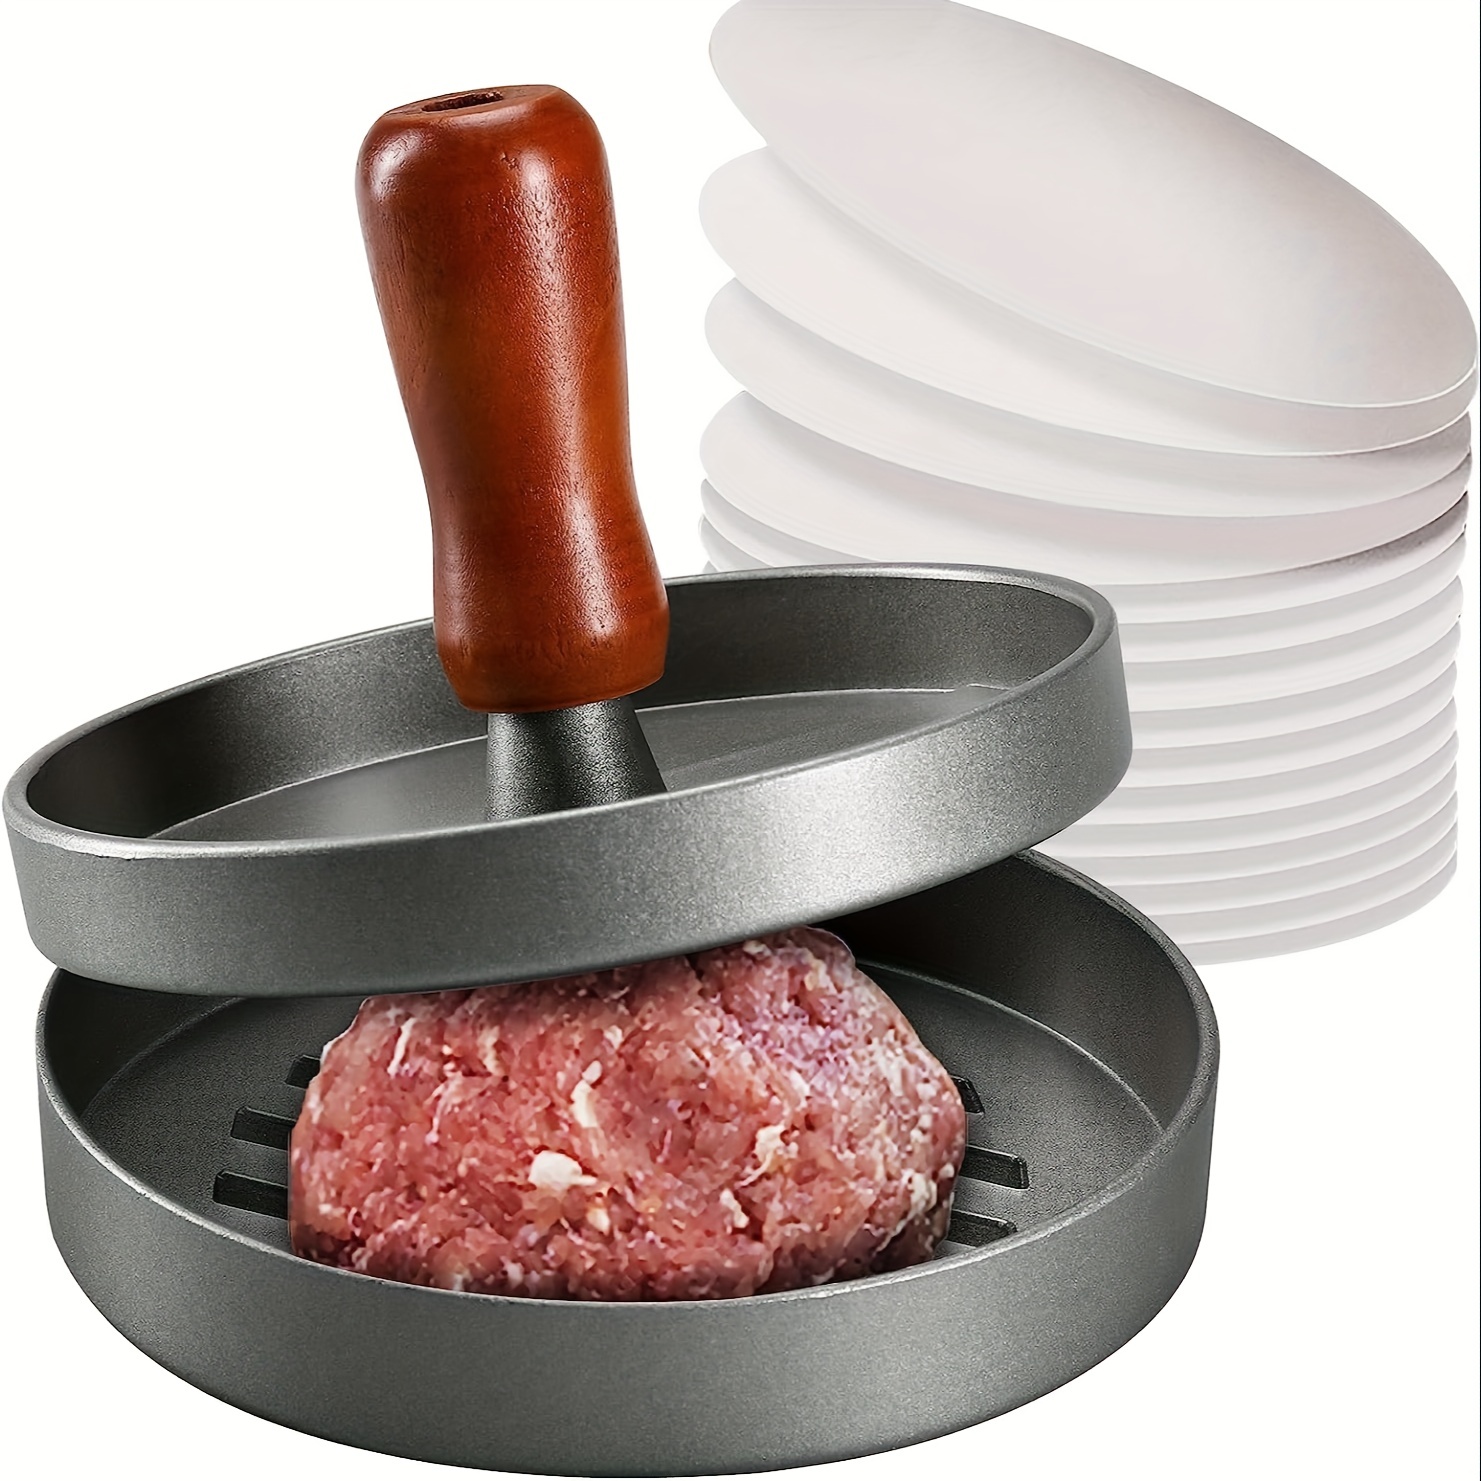 

1pc, Manual Burger Press, Non-stick Coated Wood Handle Burger Press, Heavy Hamburger Press Burger Meat Beef Grill Patty Maker Mould, Creative Kitchen Tools